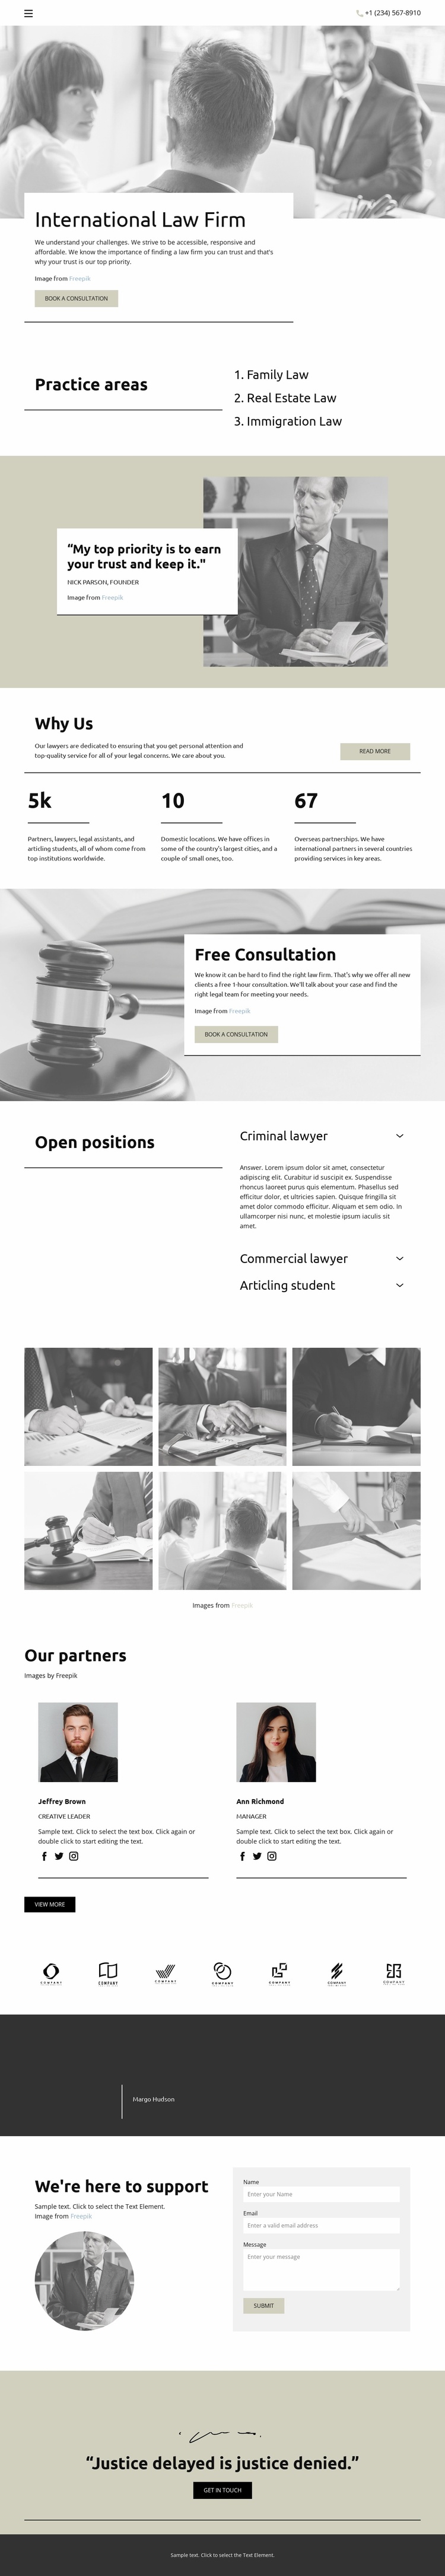 International Law Firm Landing Page